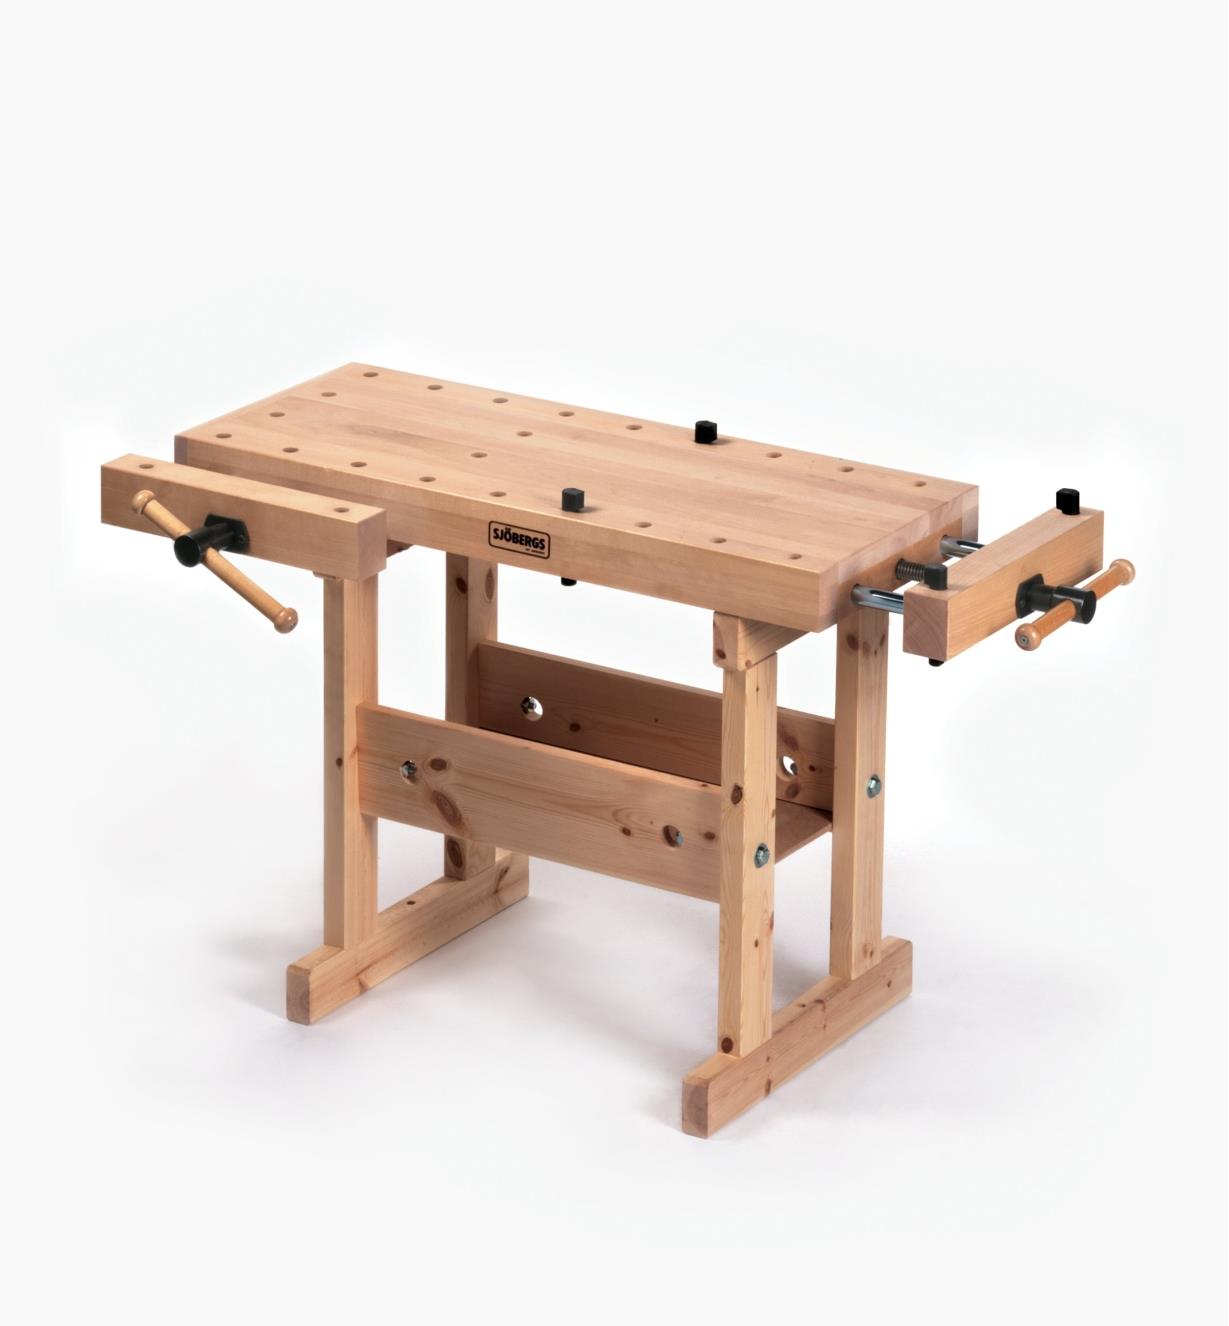 Sjobergs Compact Workbench Lee Valley Tools